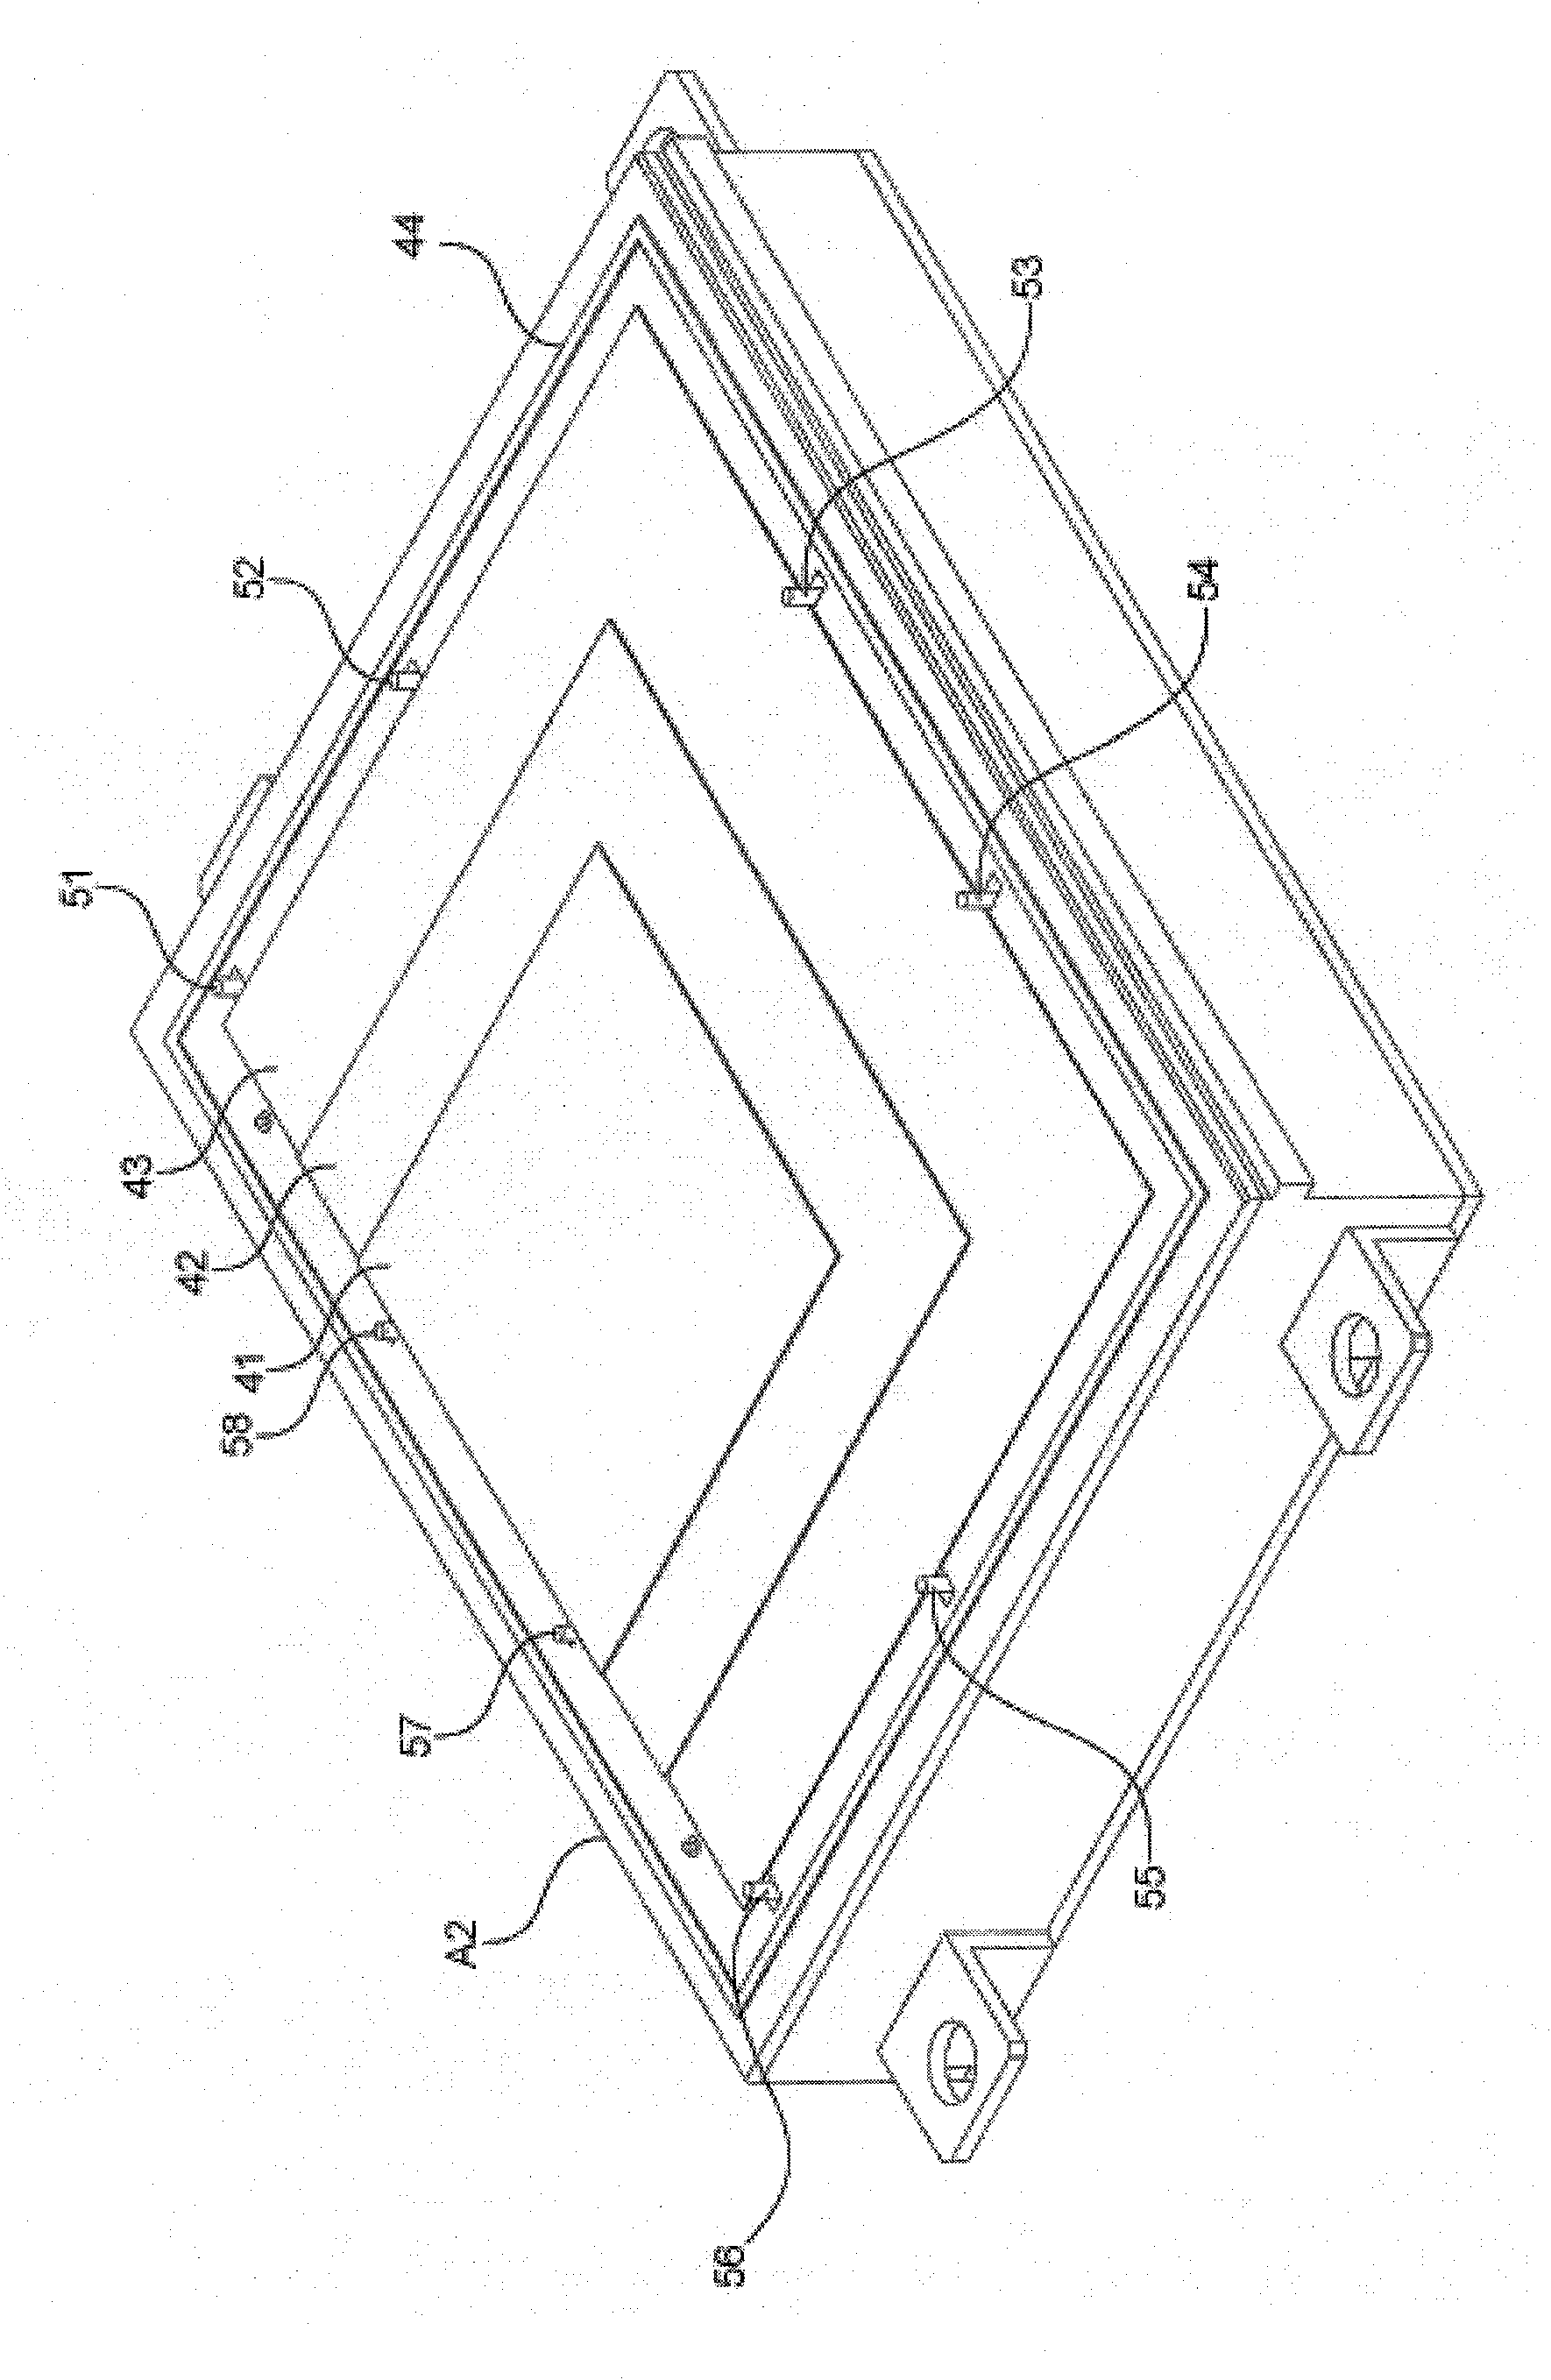 Operating platform and method of automatically installing shims